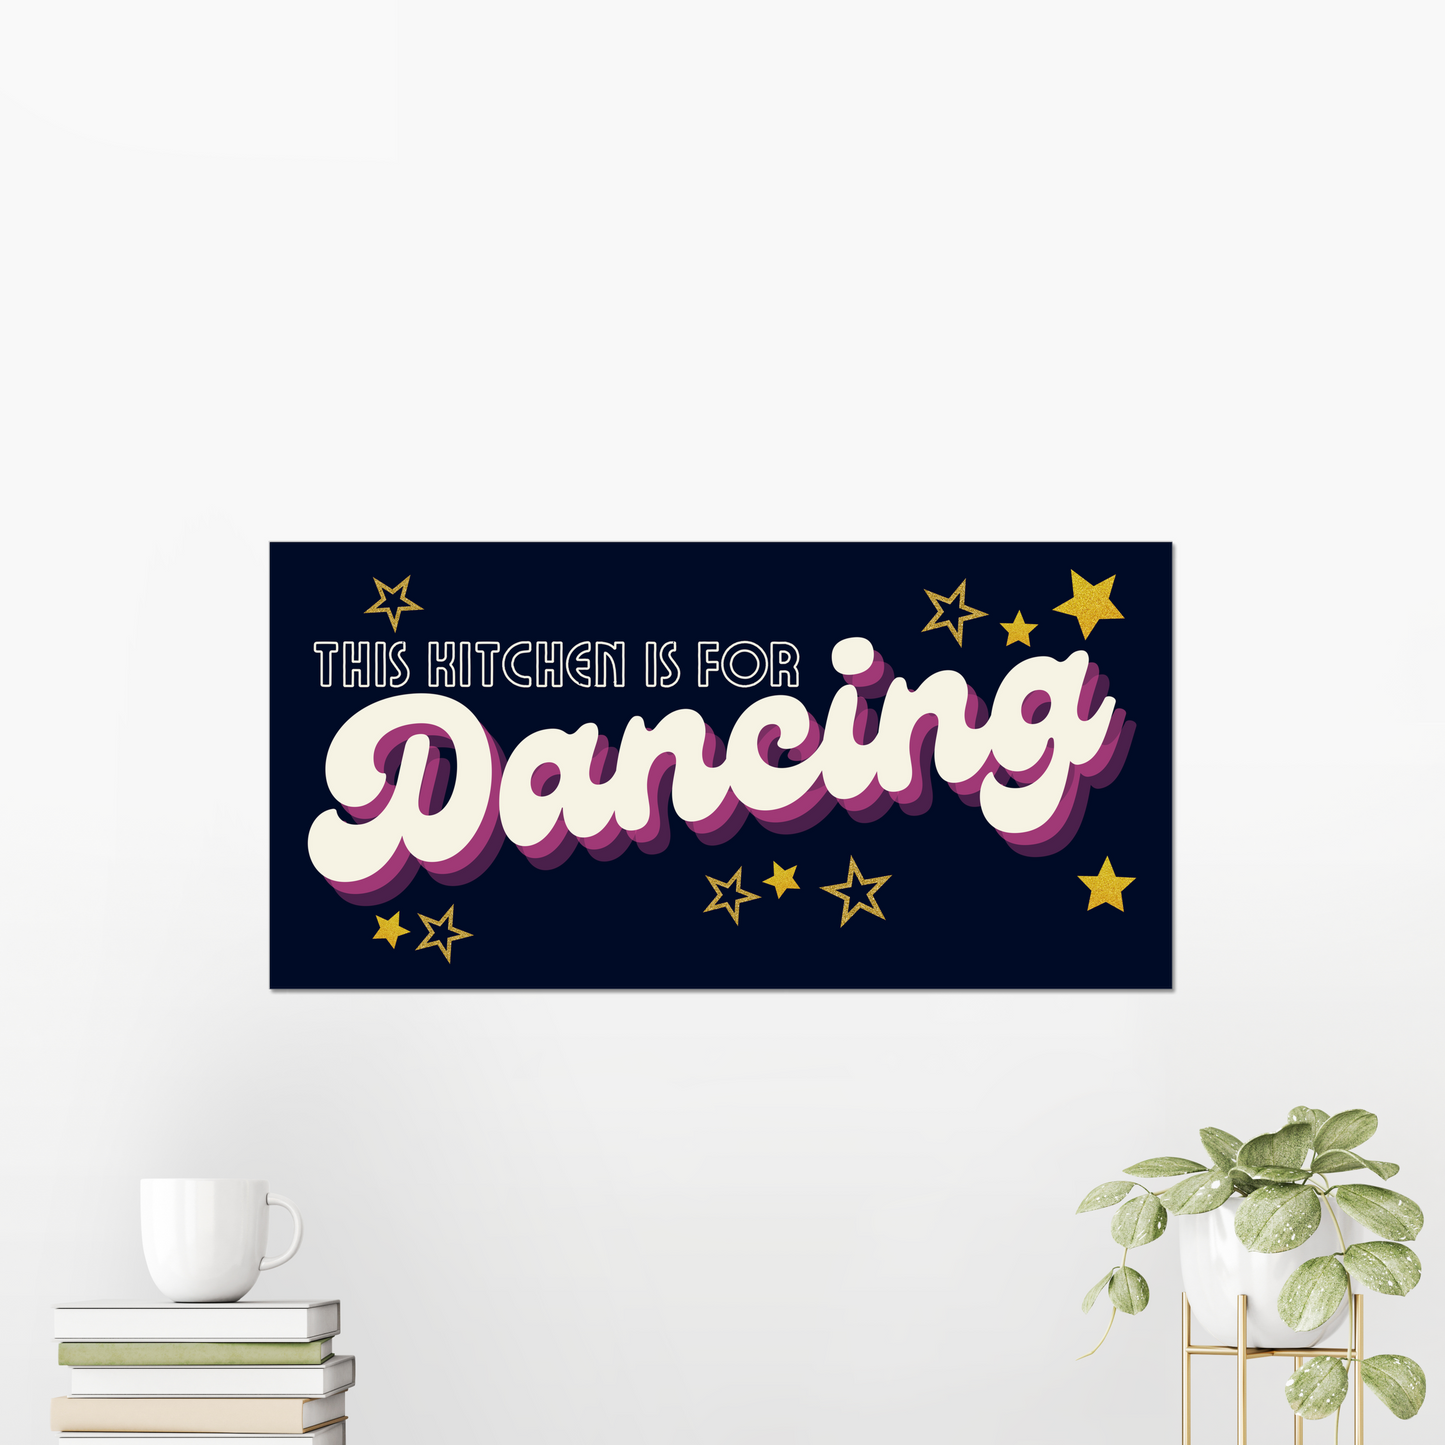 Looking for a unique and stylish kitchen update? Look no further than our 'This Kitchen Is For Dancing' art print! Our prints feature retro vibes with a navy, gold and sparkly style stars. They're perfect as a gift for someone special - or for treating yourself!